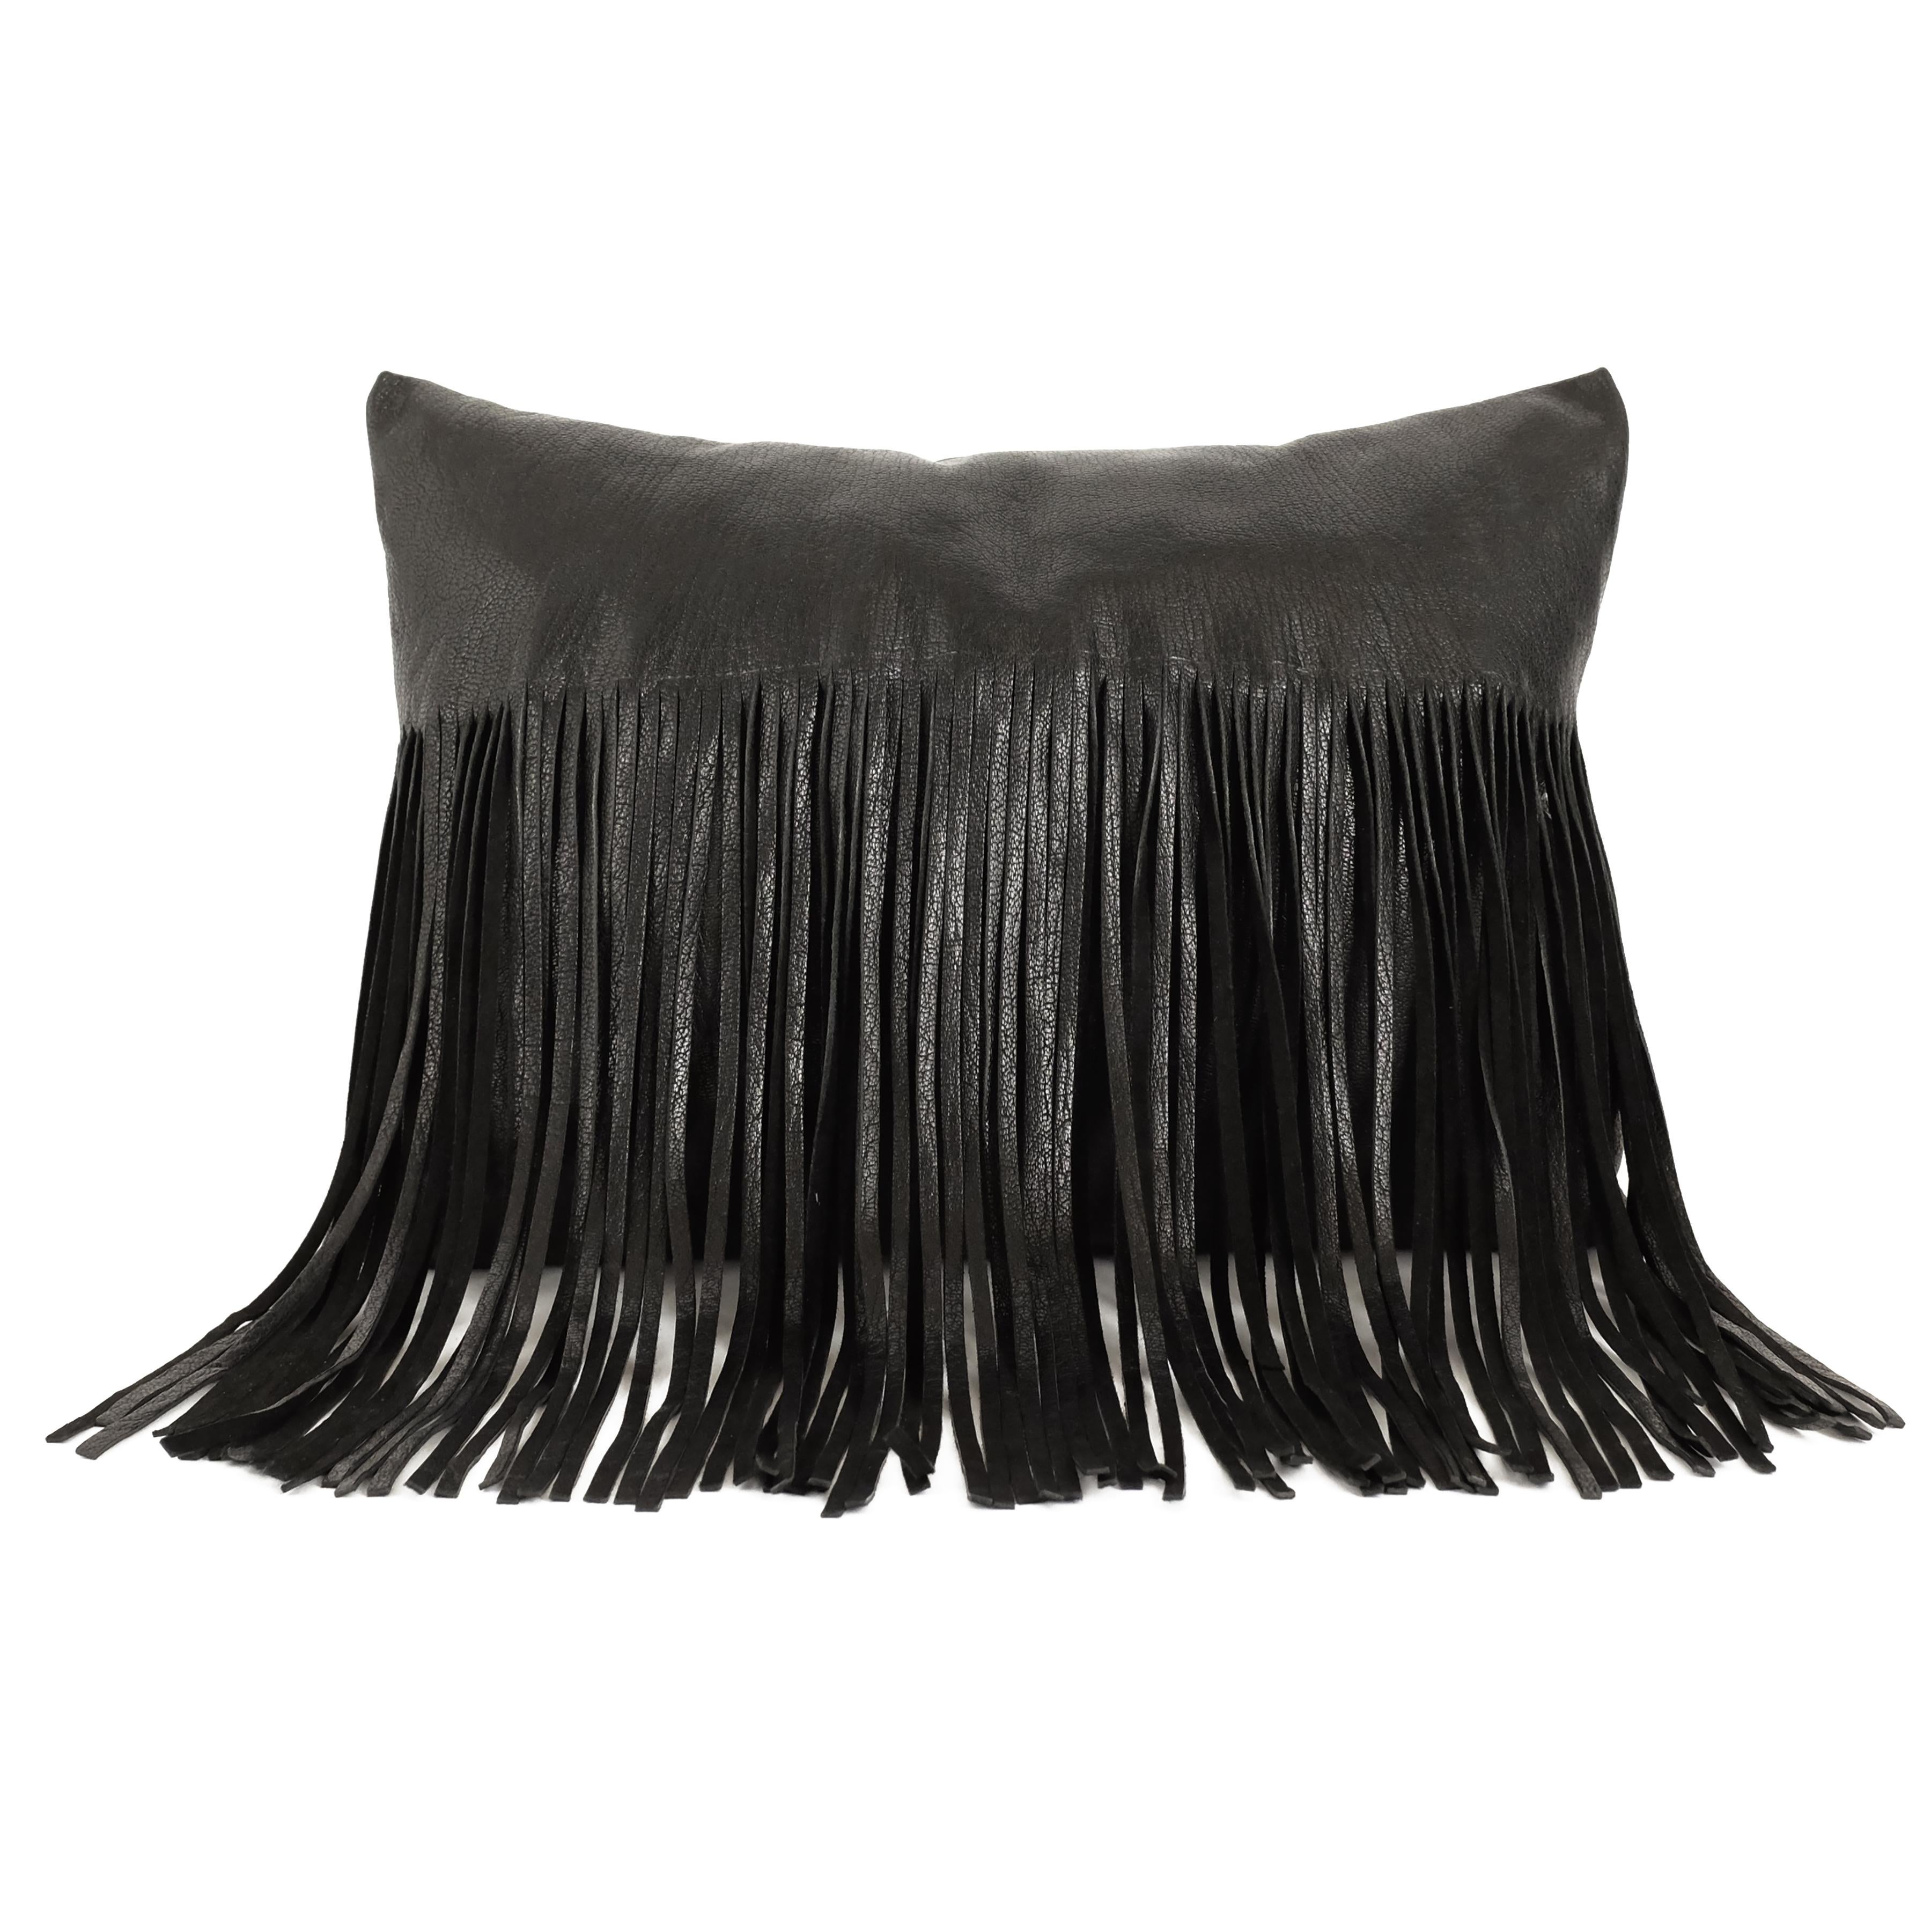 Designed to add flair, this handmade supple leather pillow has a smooth top that gracefully transforms into long hanging leather fringe adornment.

Also customizable a range of colors and sizes. Style no. ICU1603-SNG-TP. Production time 3-4 weeks.